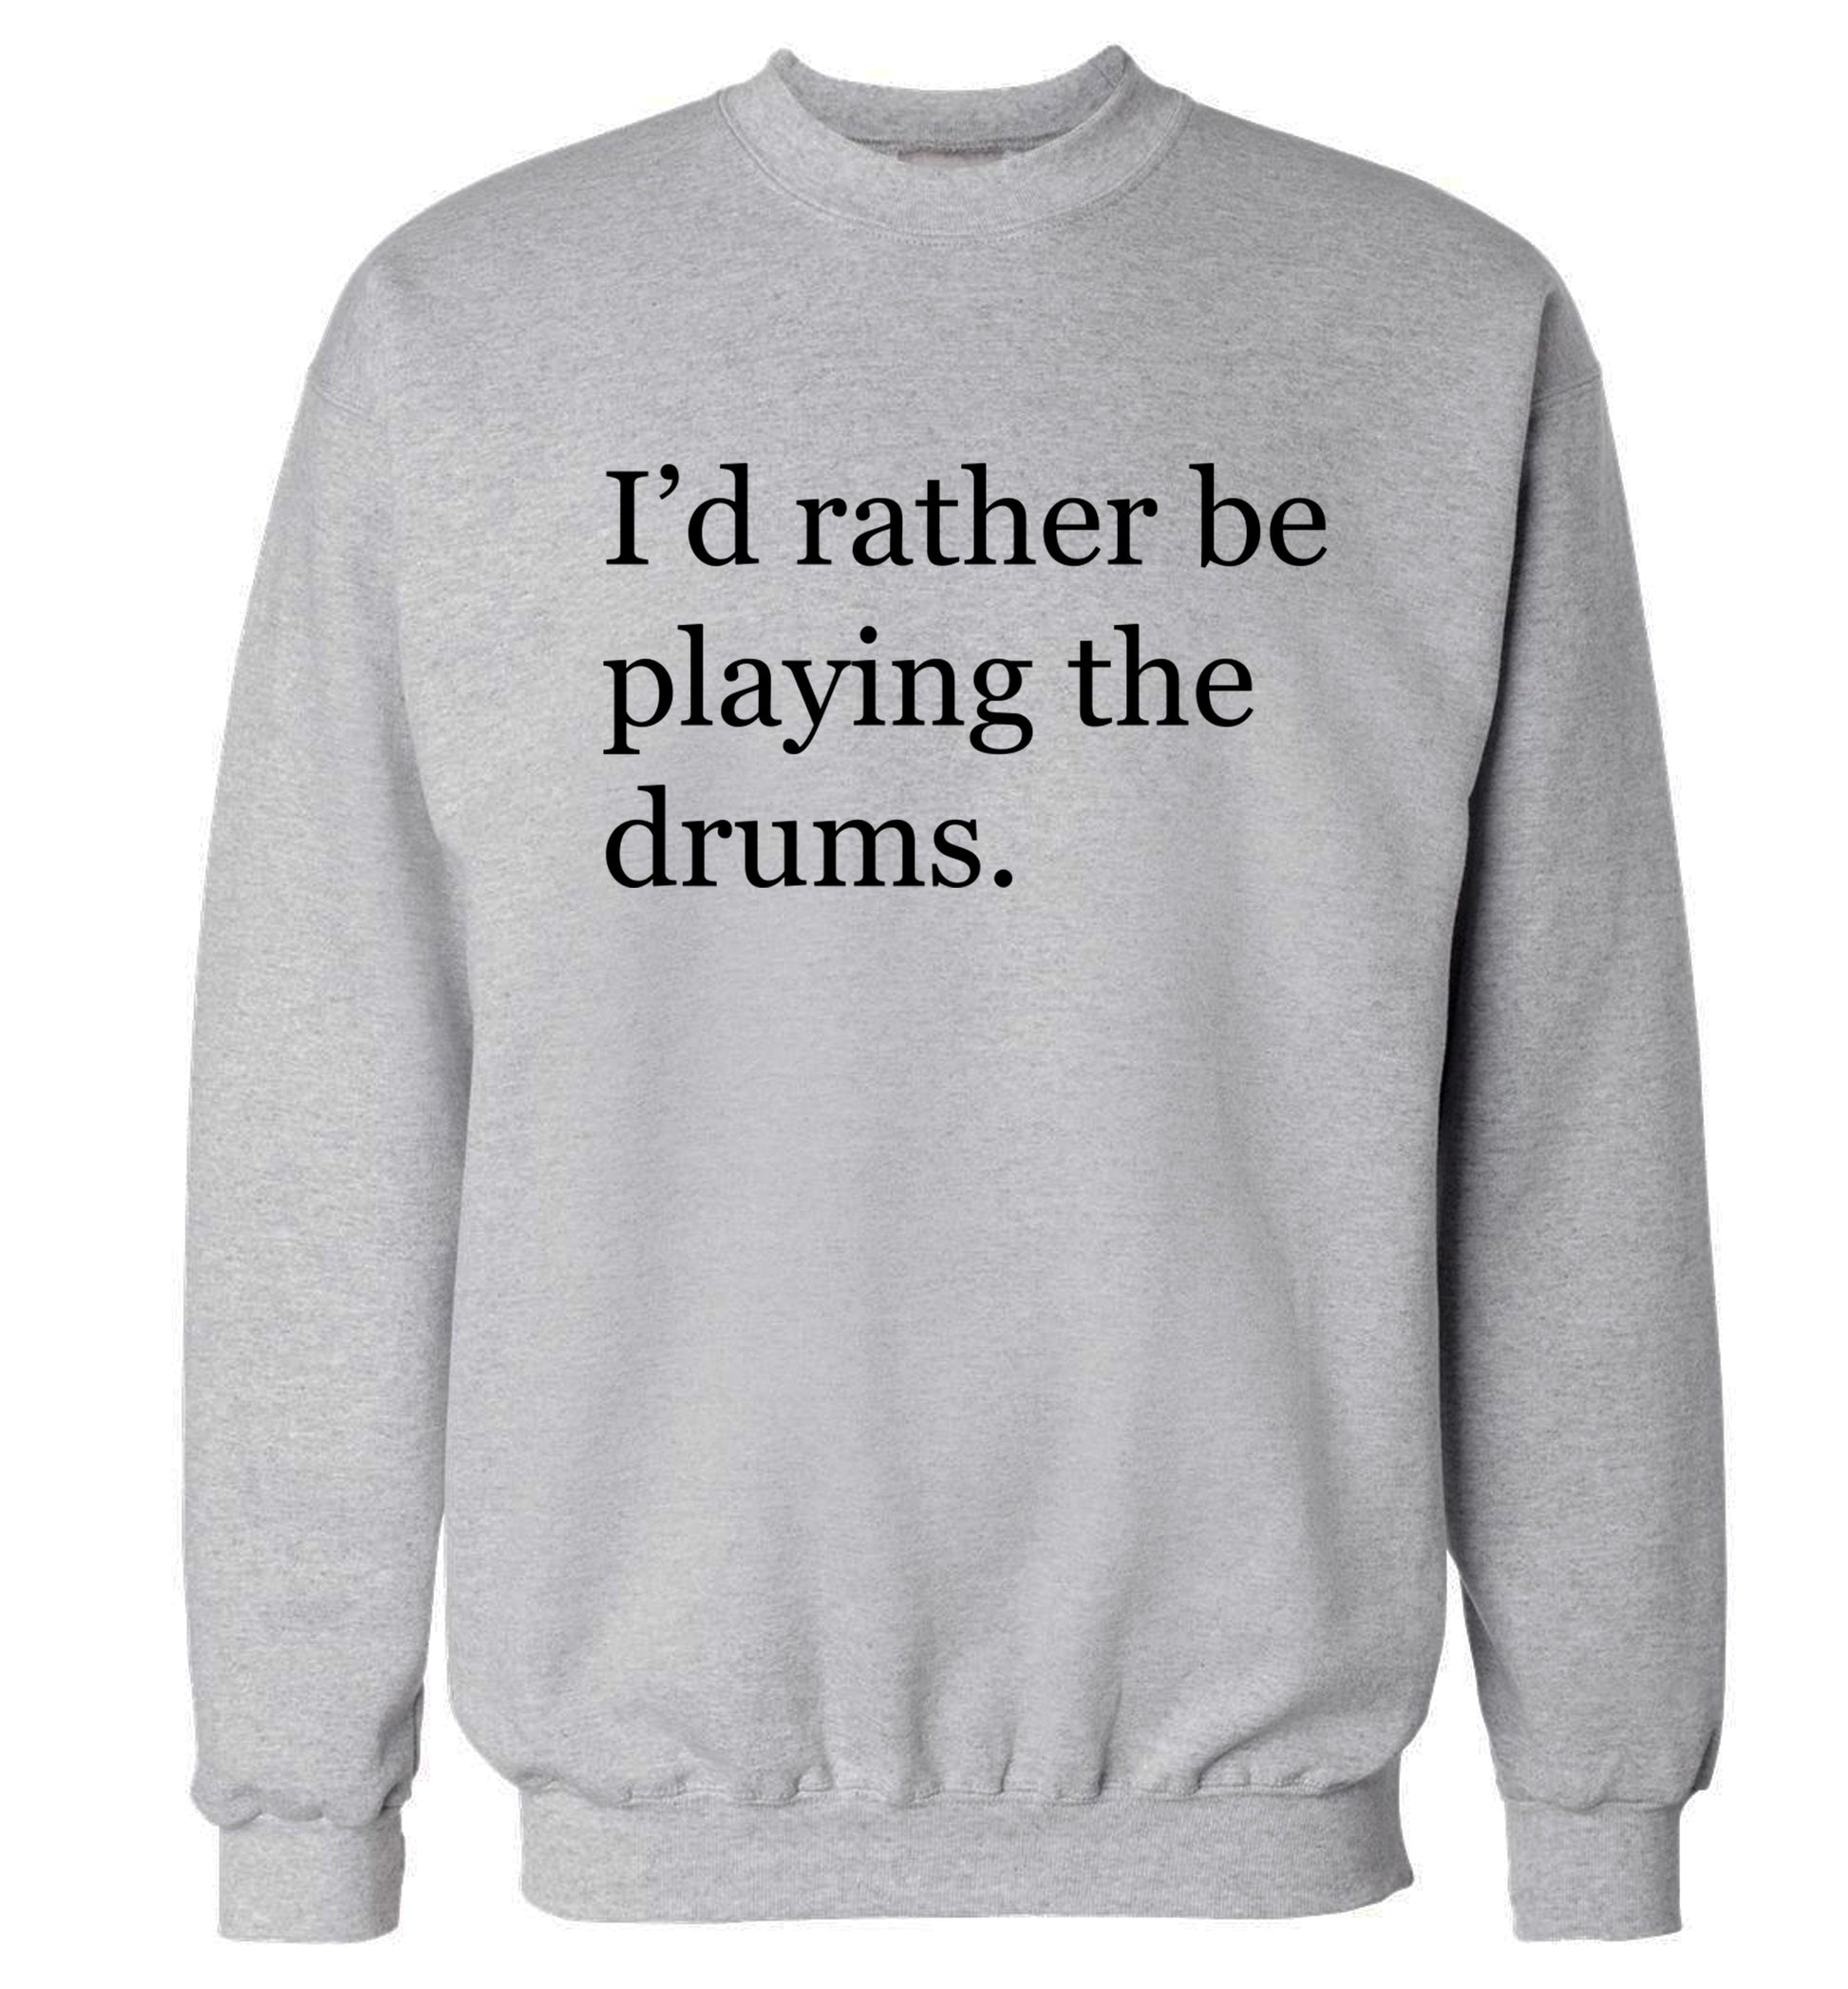 I'd rather be playing the drums Adult's unisexgrey Sweater 2XL